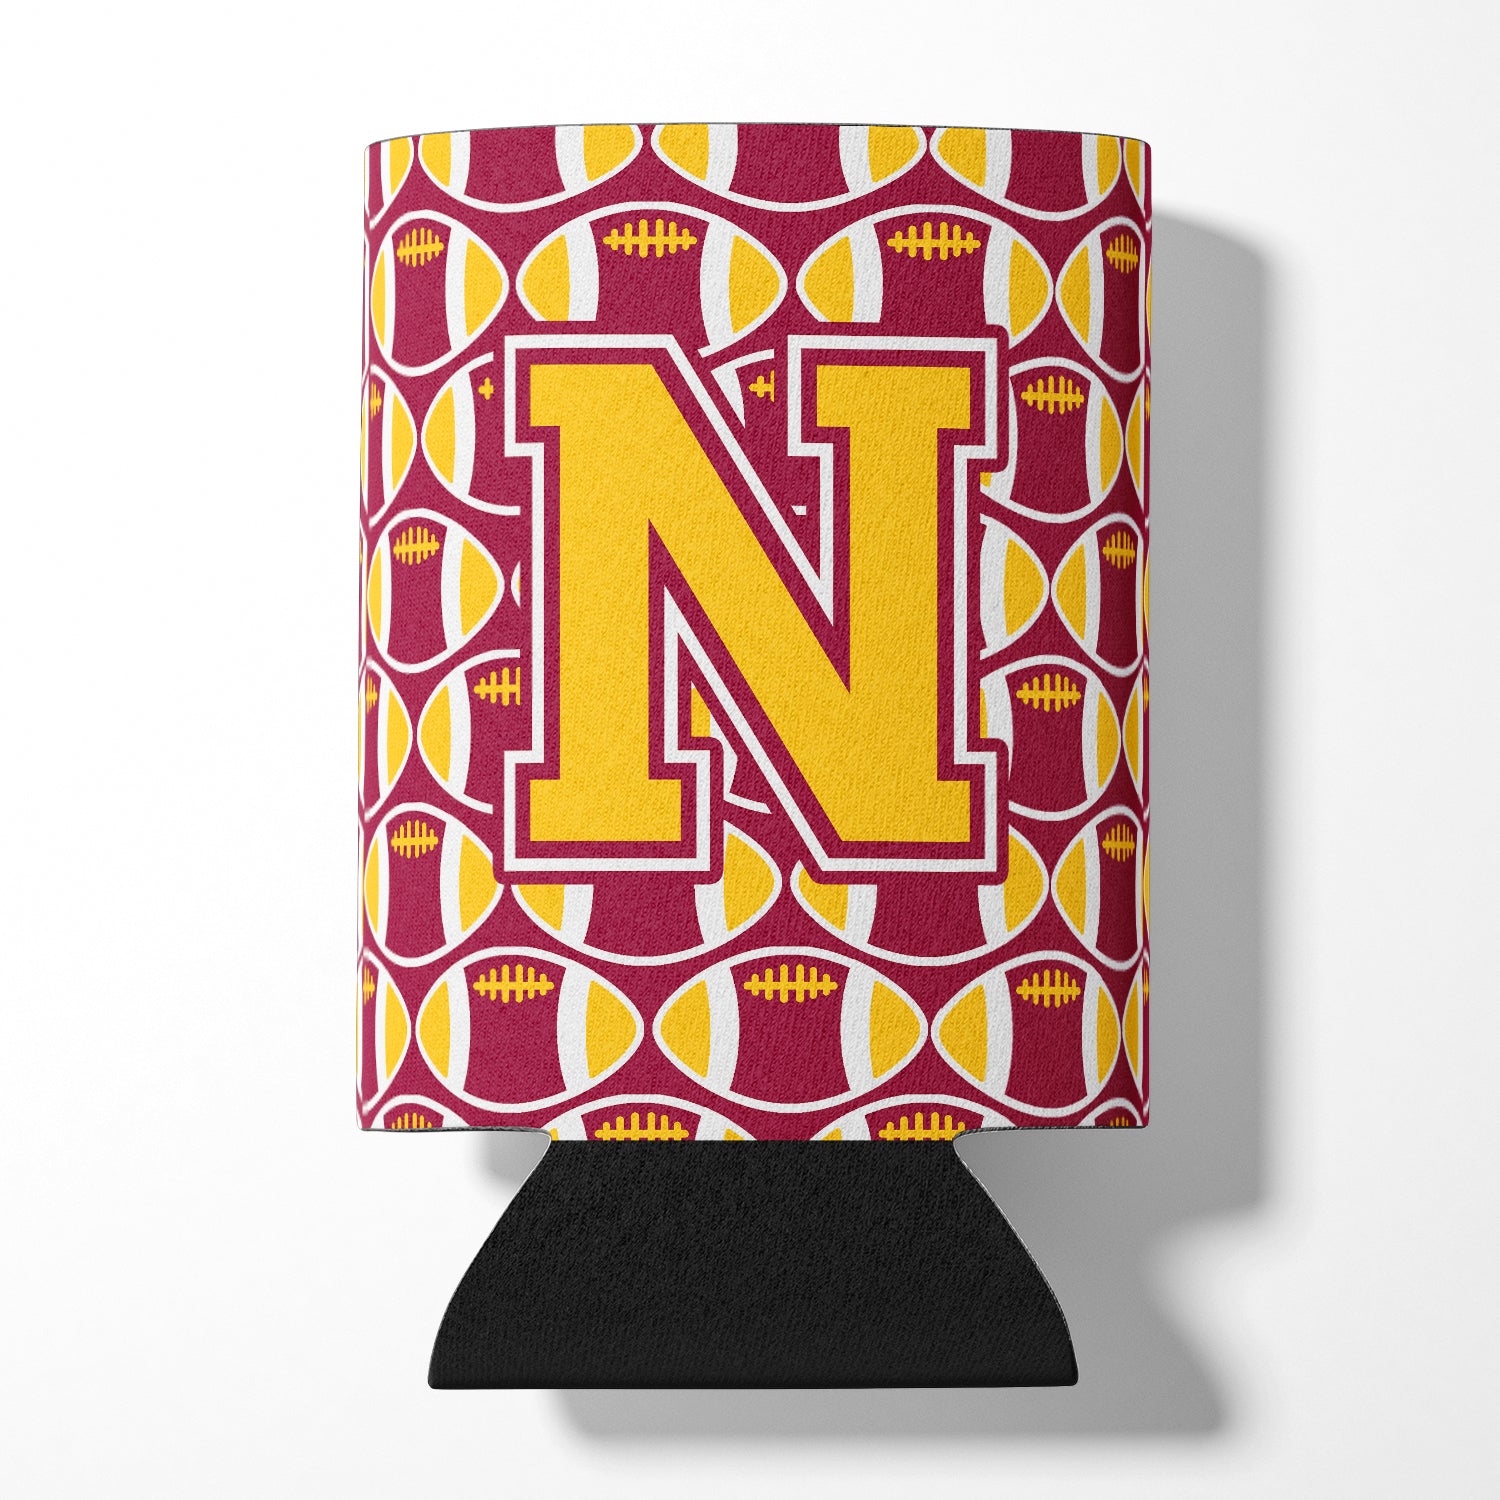 Letter N Football Maroon and Gold Can or Bottle Hugger CJ1081-NCC